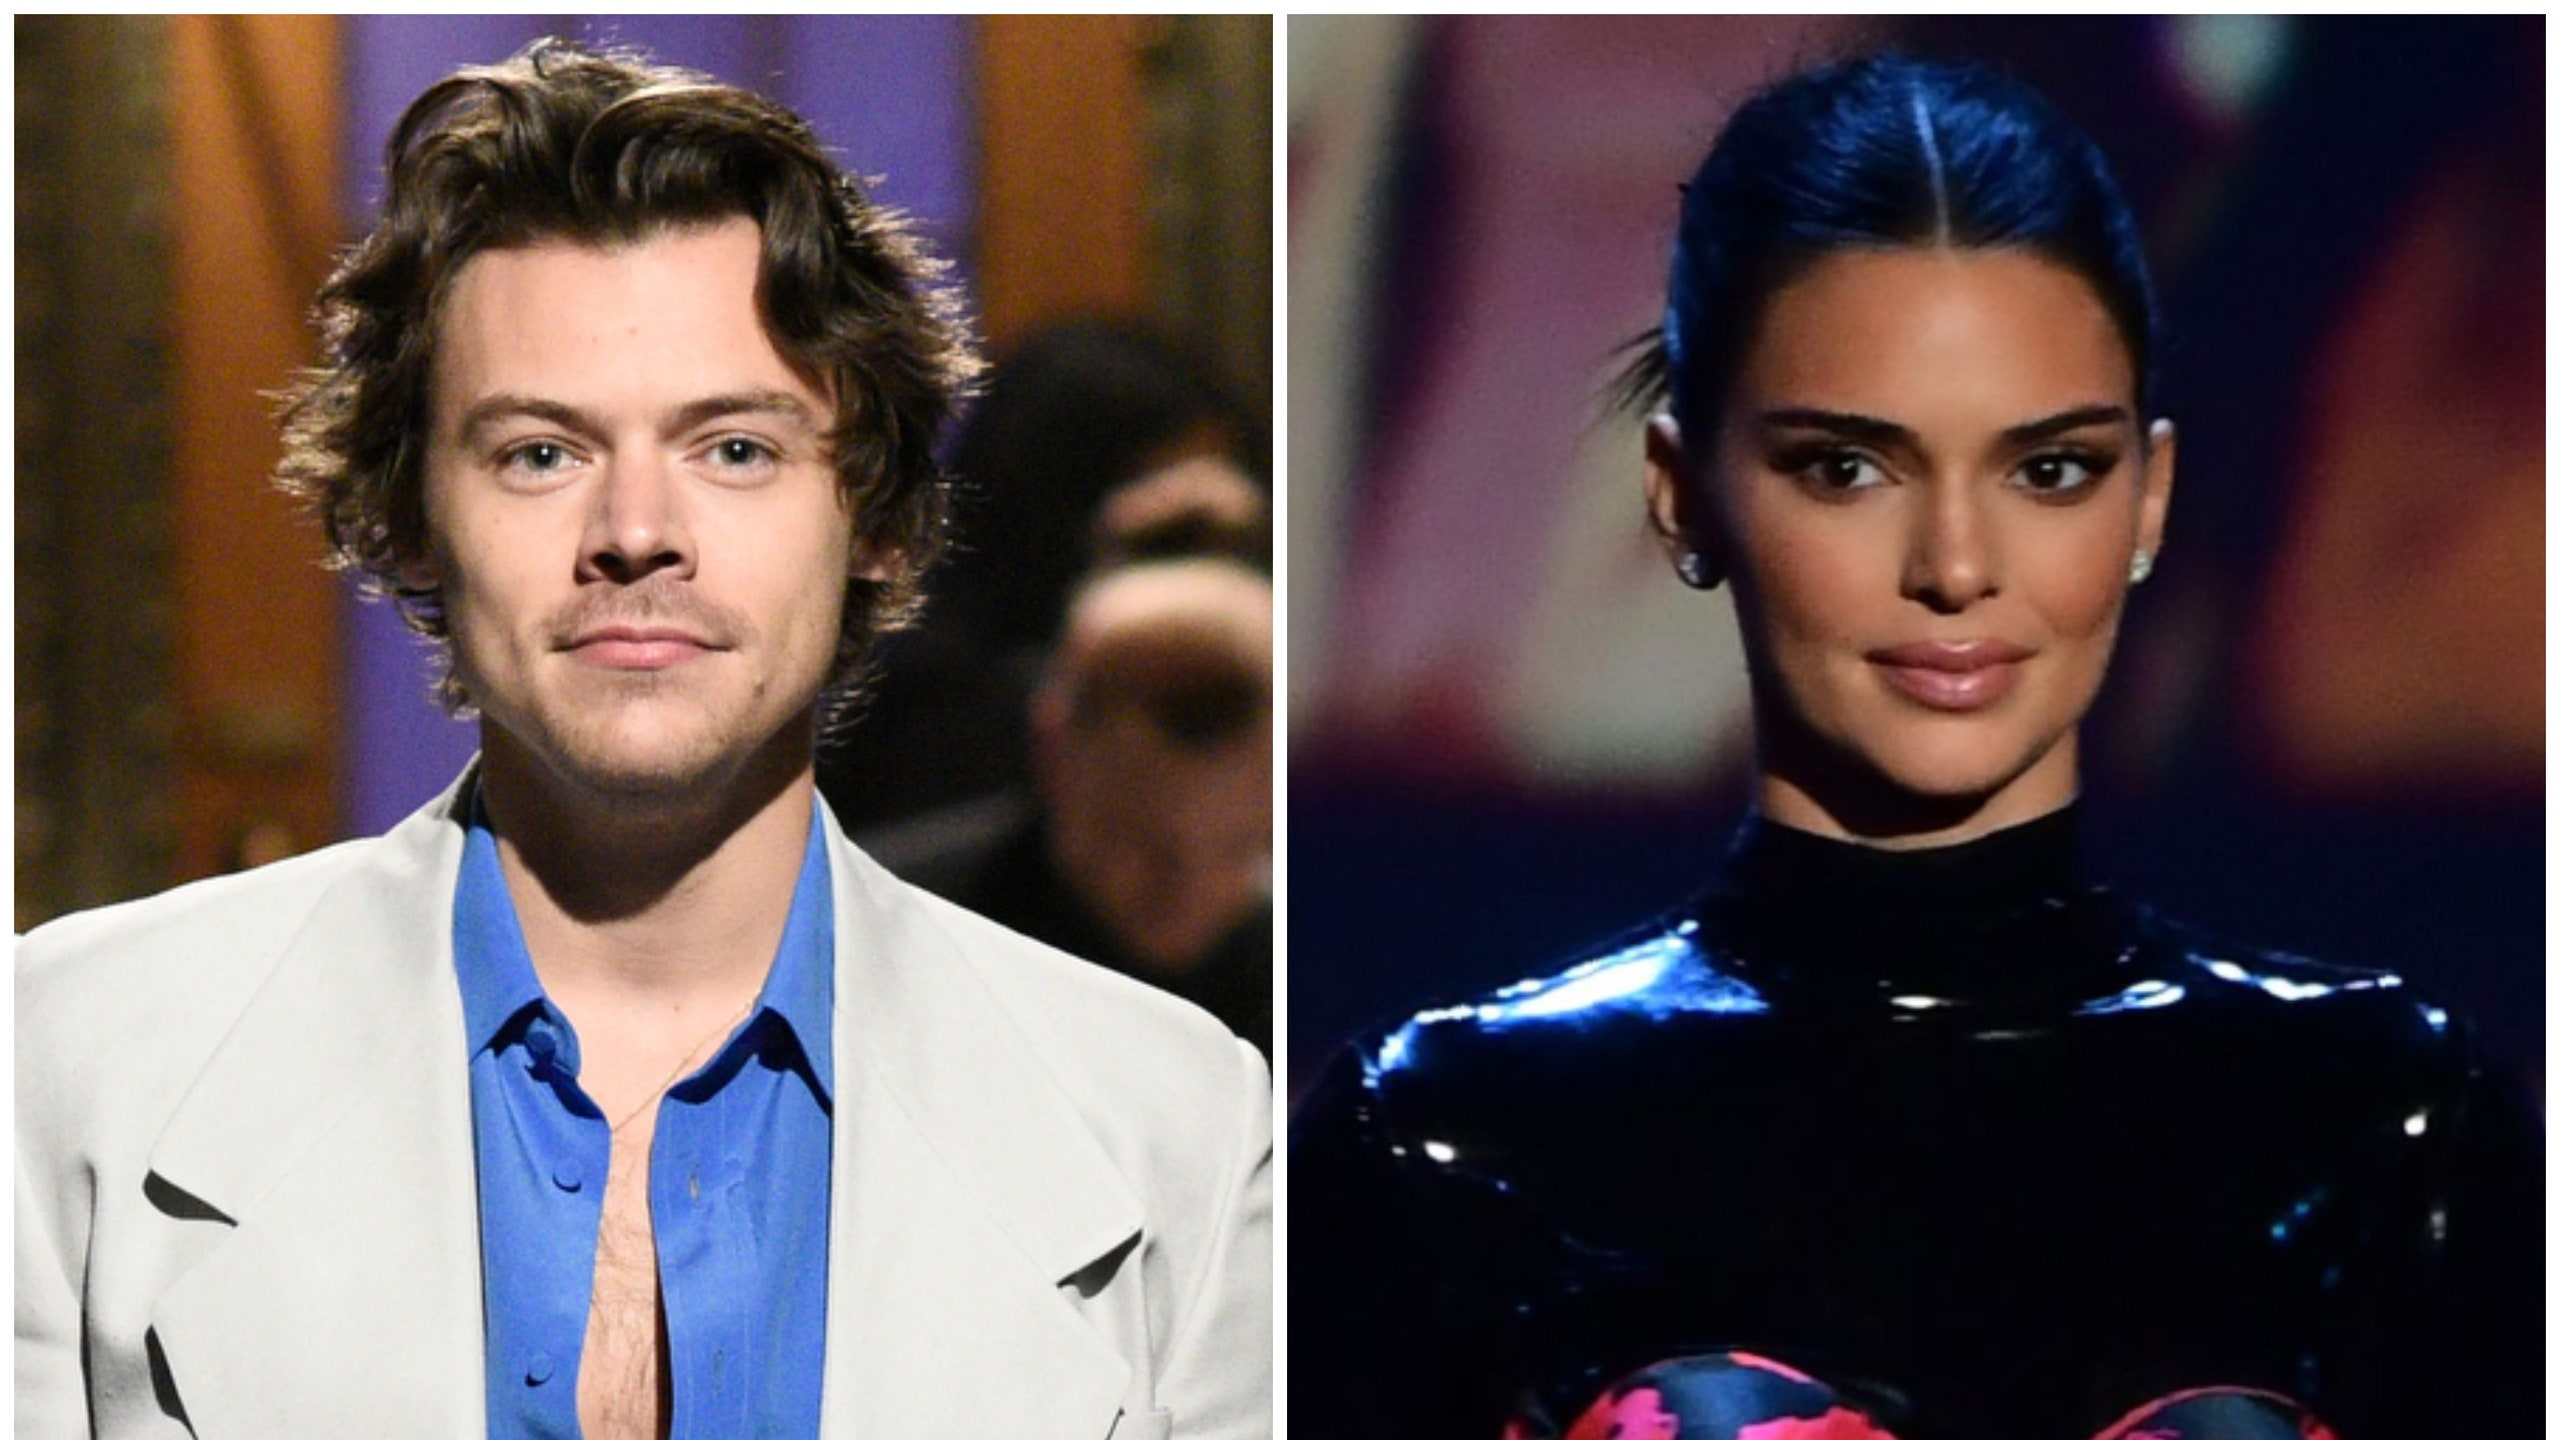 Kendall Jenner Harry Styles Wallpapers